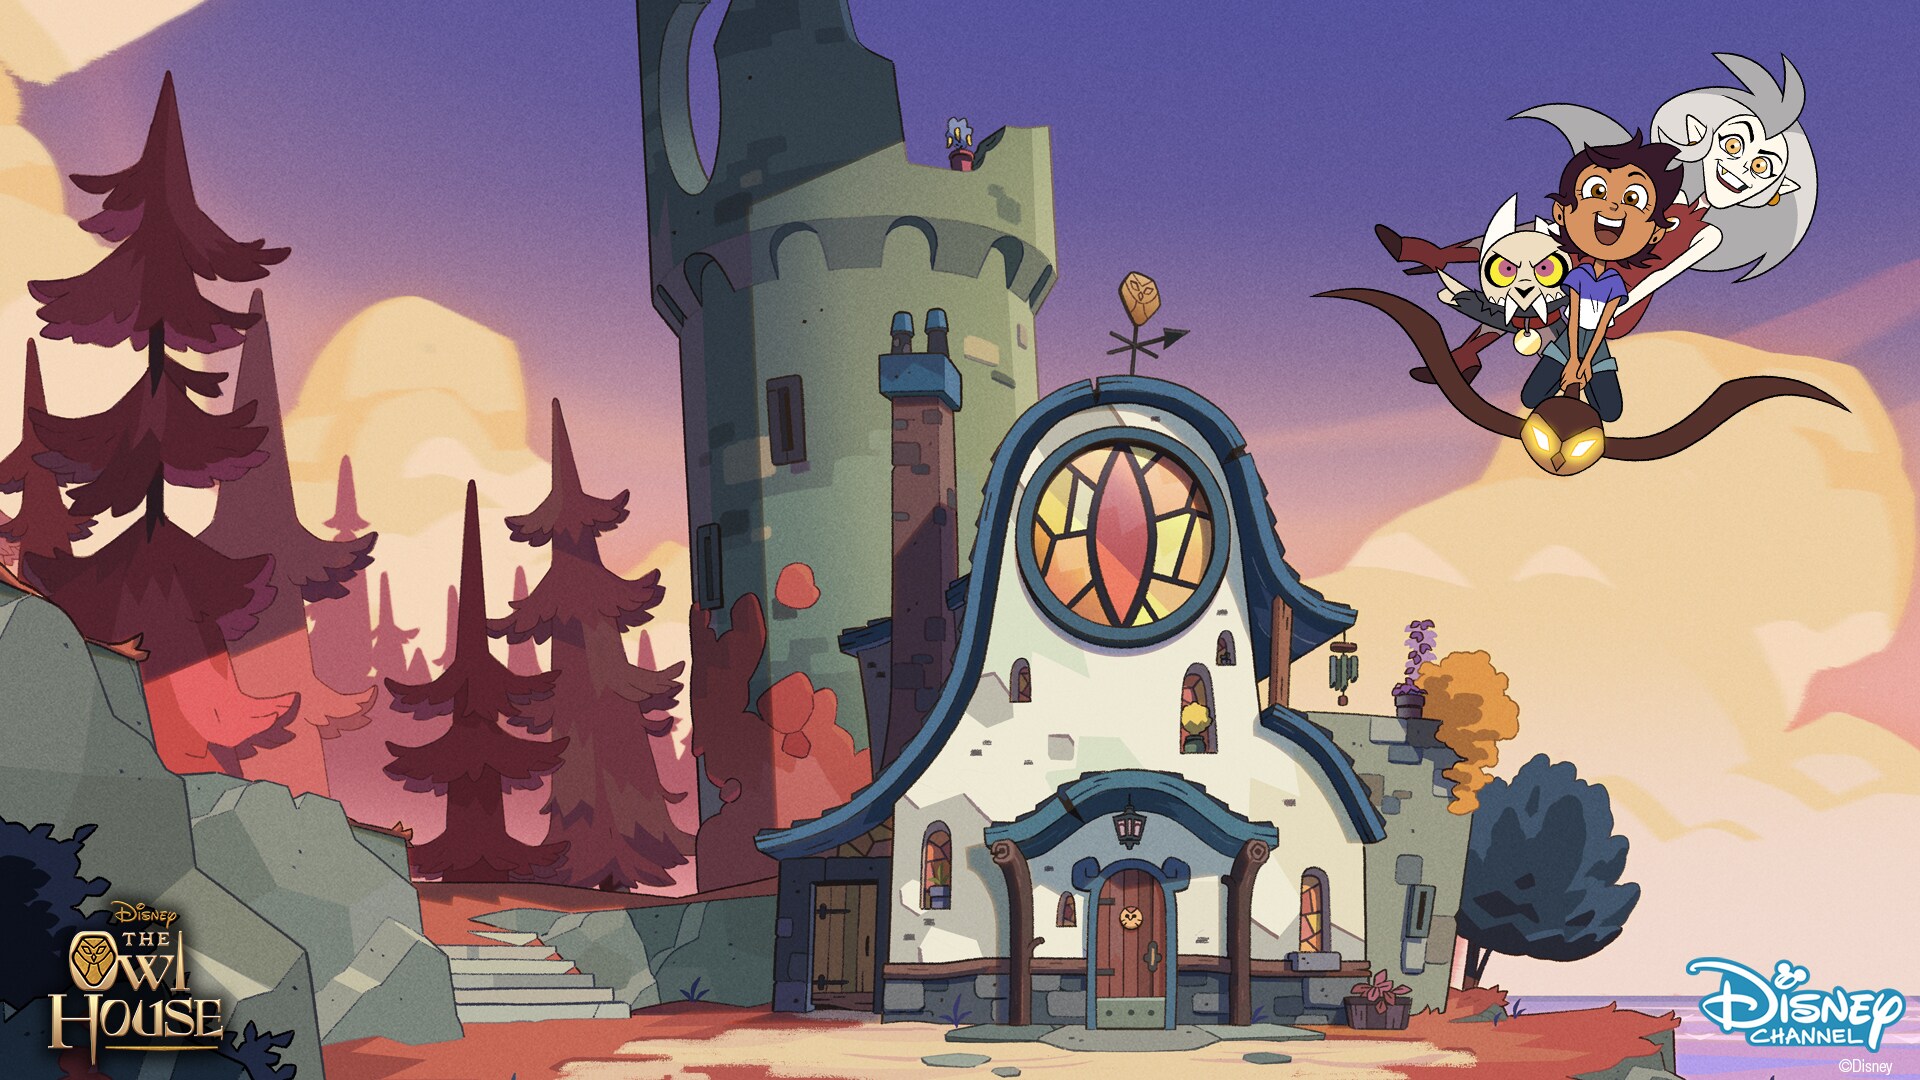 The Owl House background